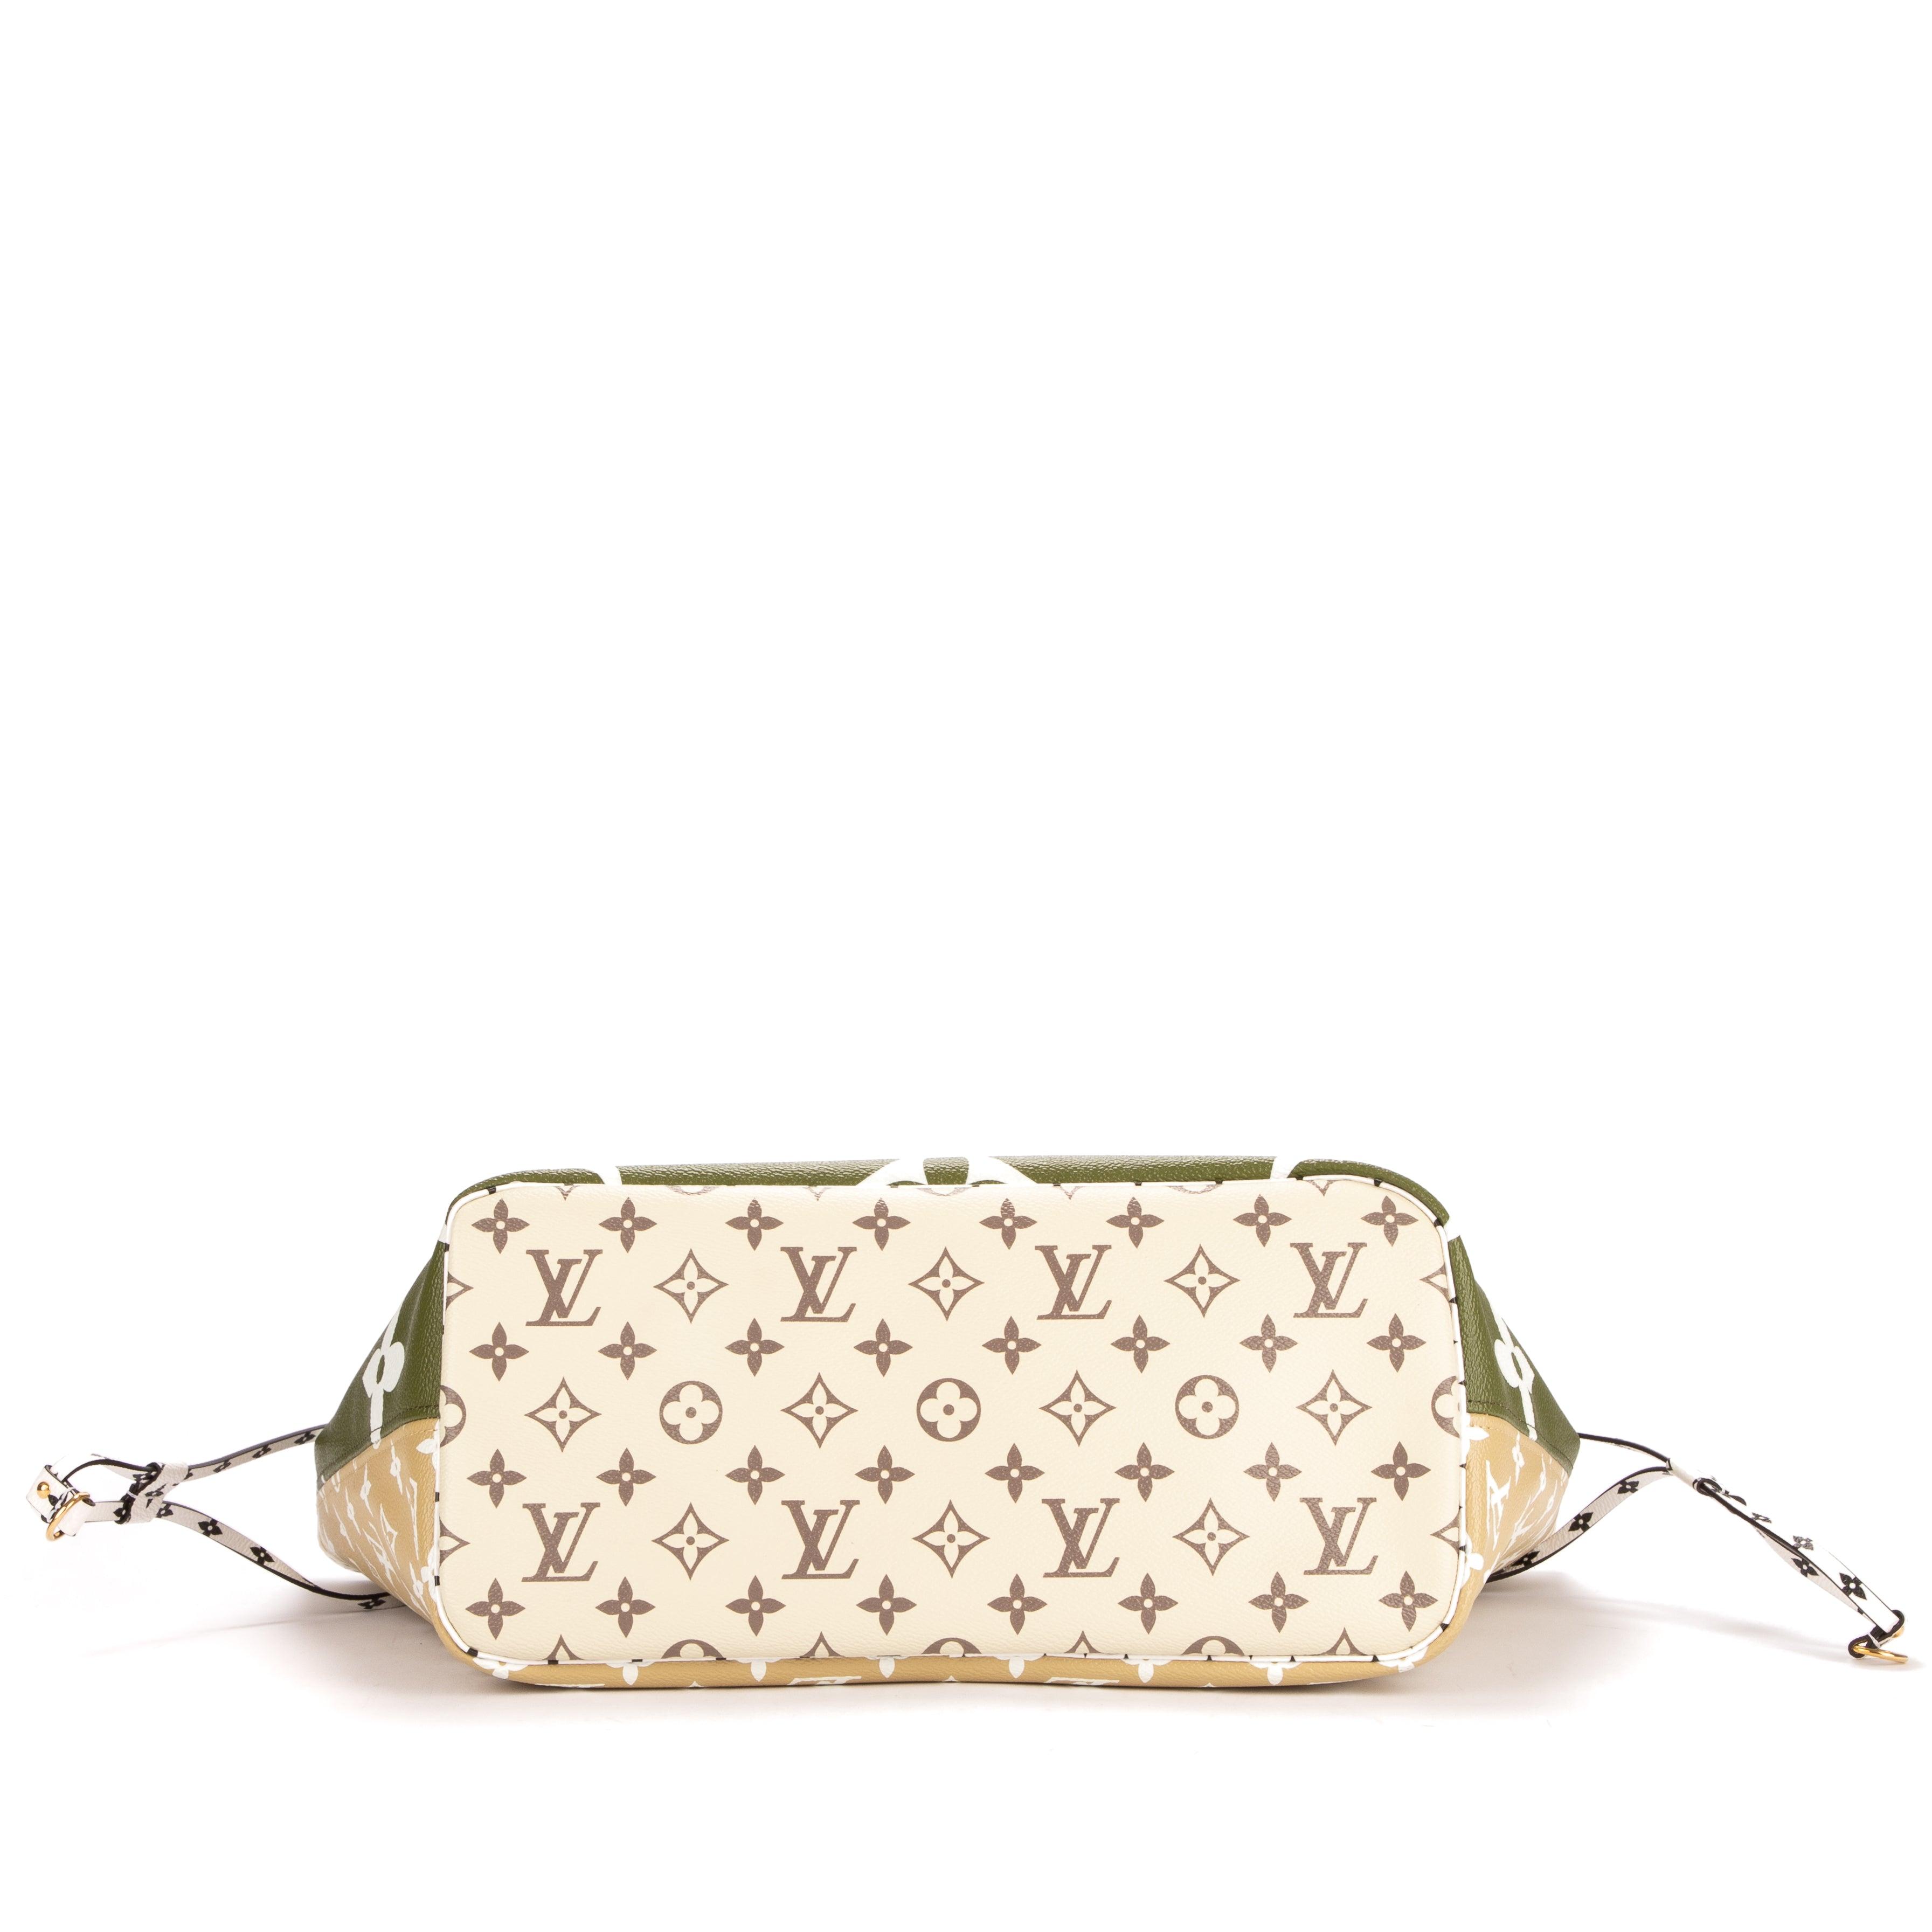 Green Louis Vuitton Neverfull - For Sale on 1stDibs